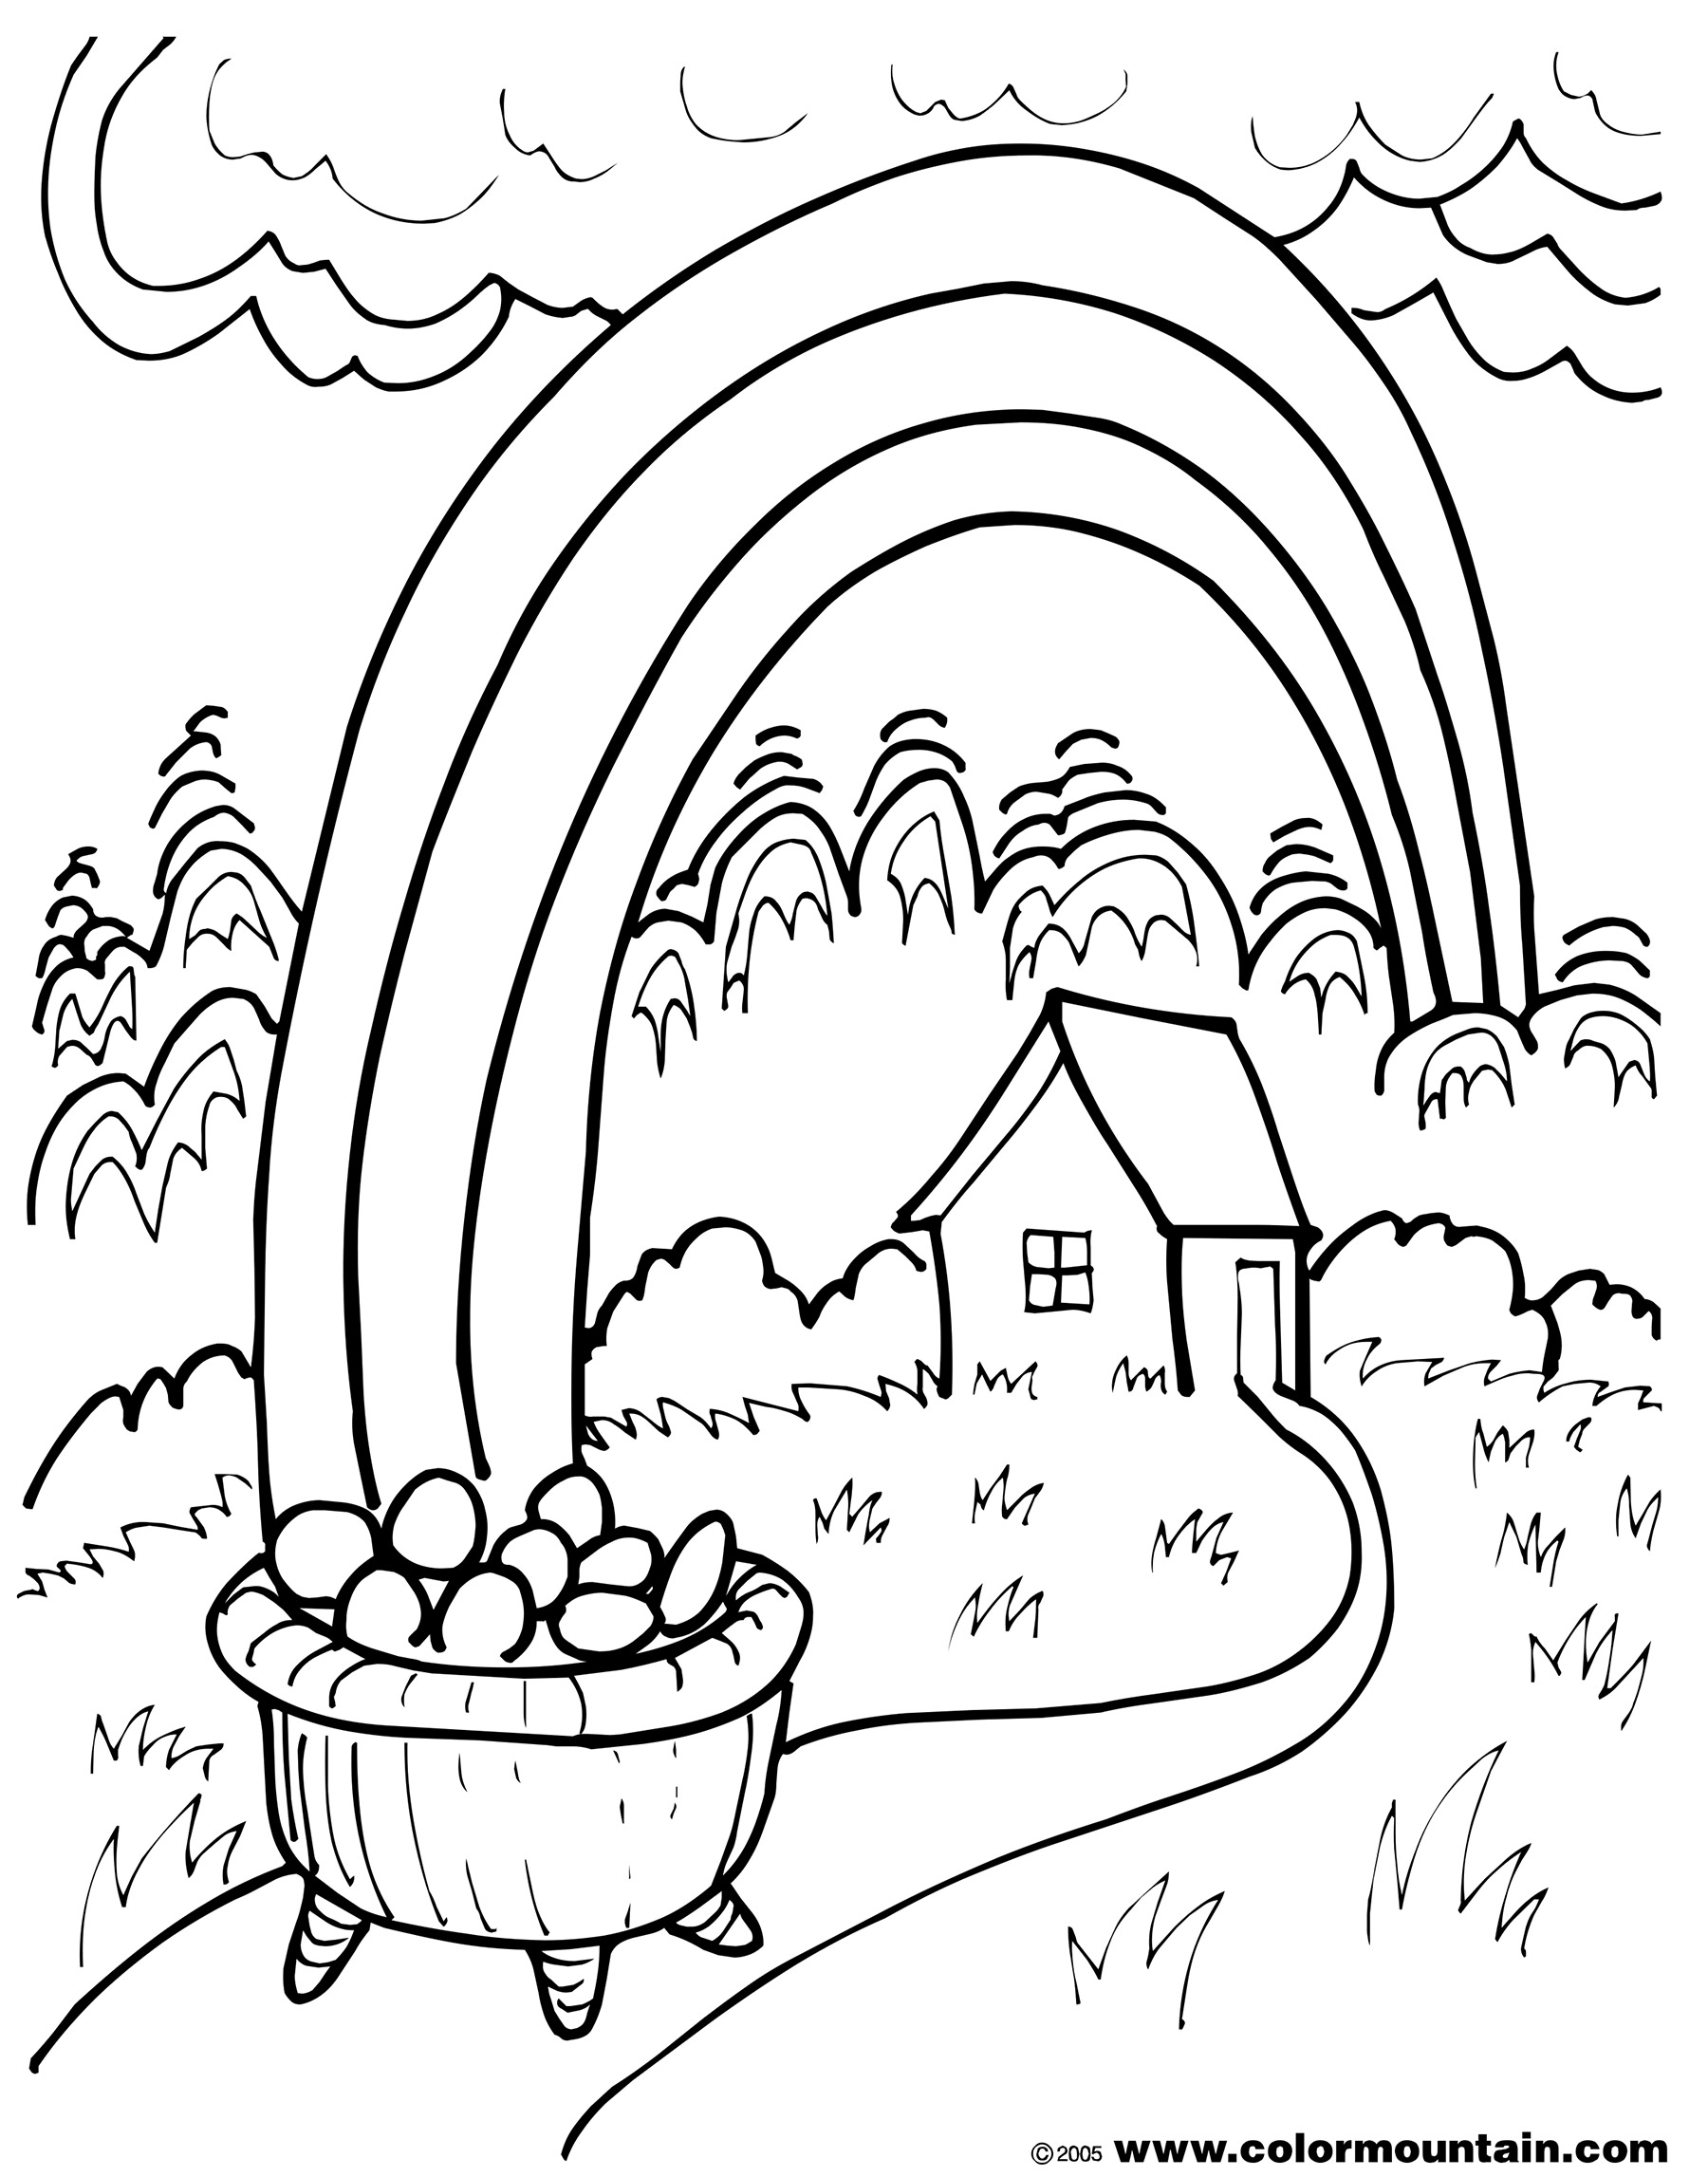 Free Preschool Coloring Pages Rainbows Coloring Pages